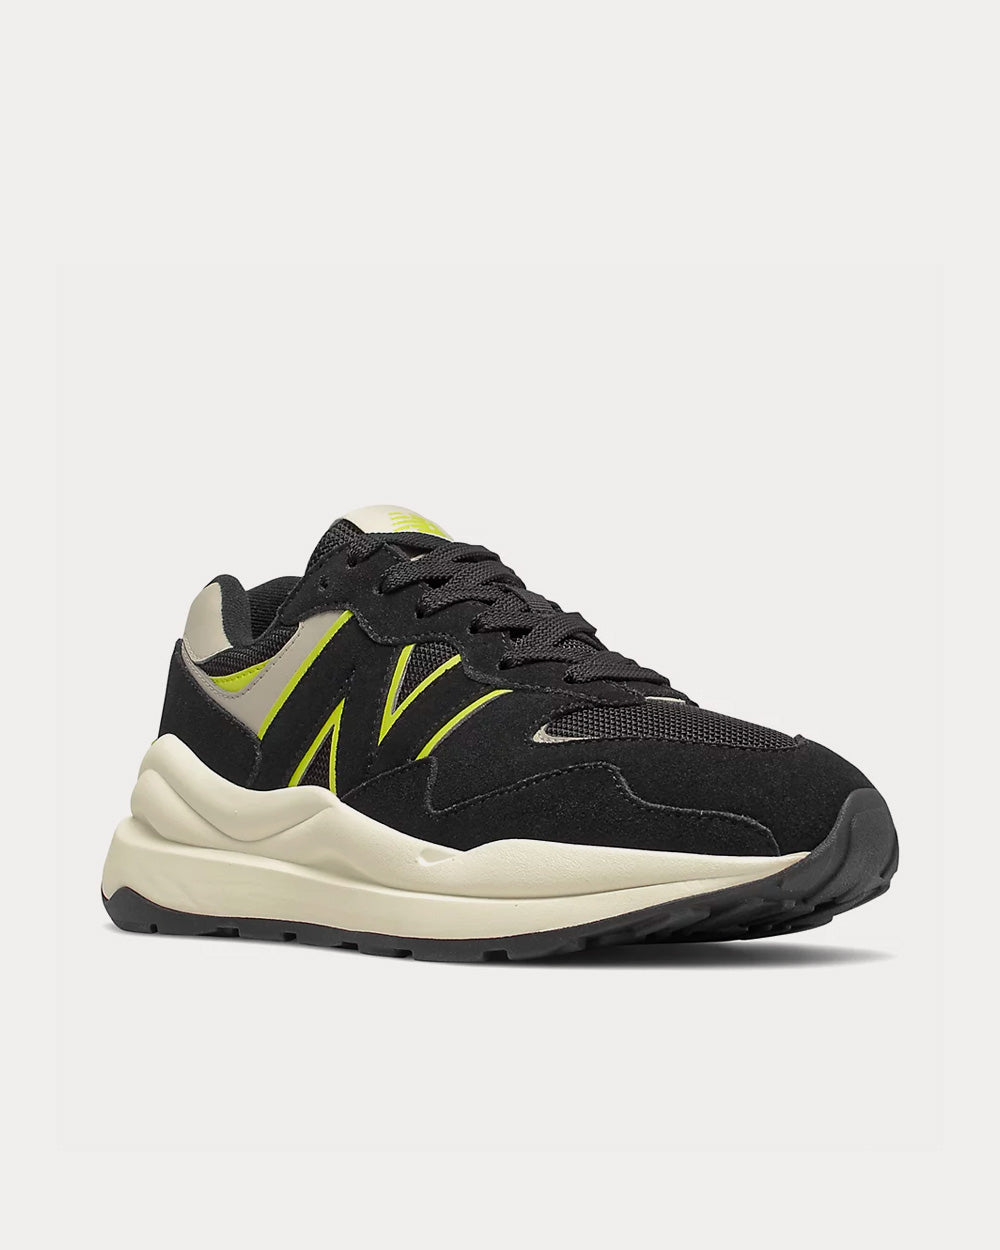 New Balance - 57/40 Black with Oyster Pink Low Top Sneakers